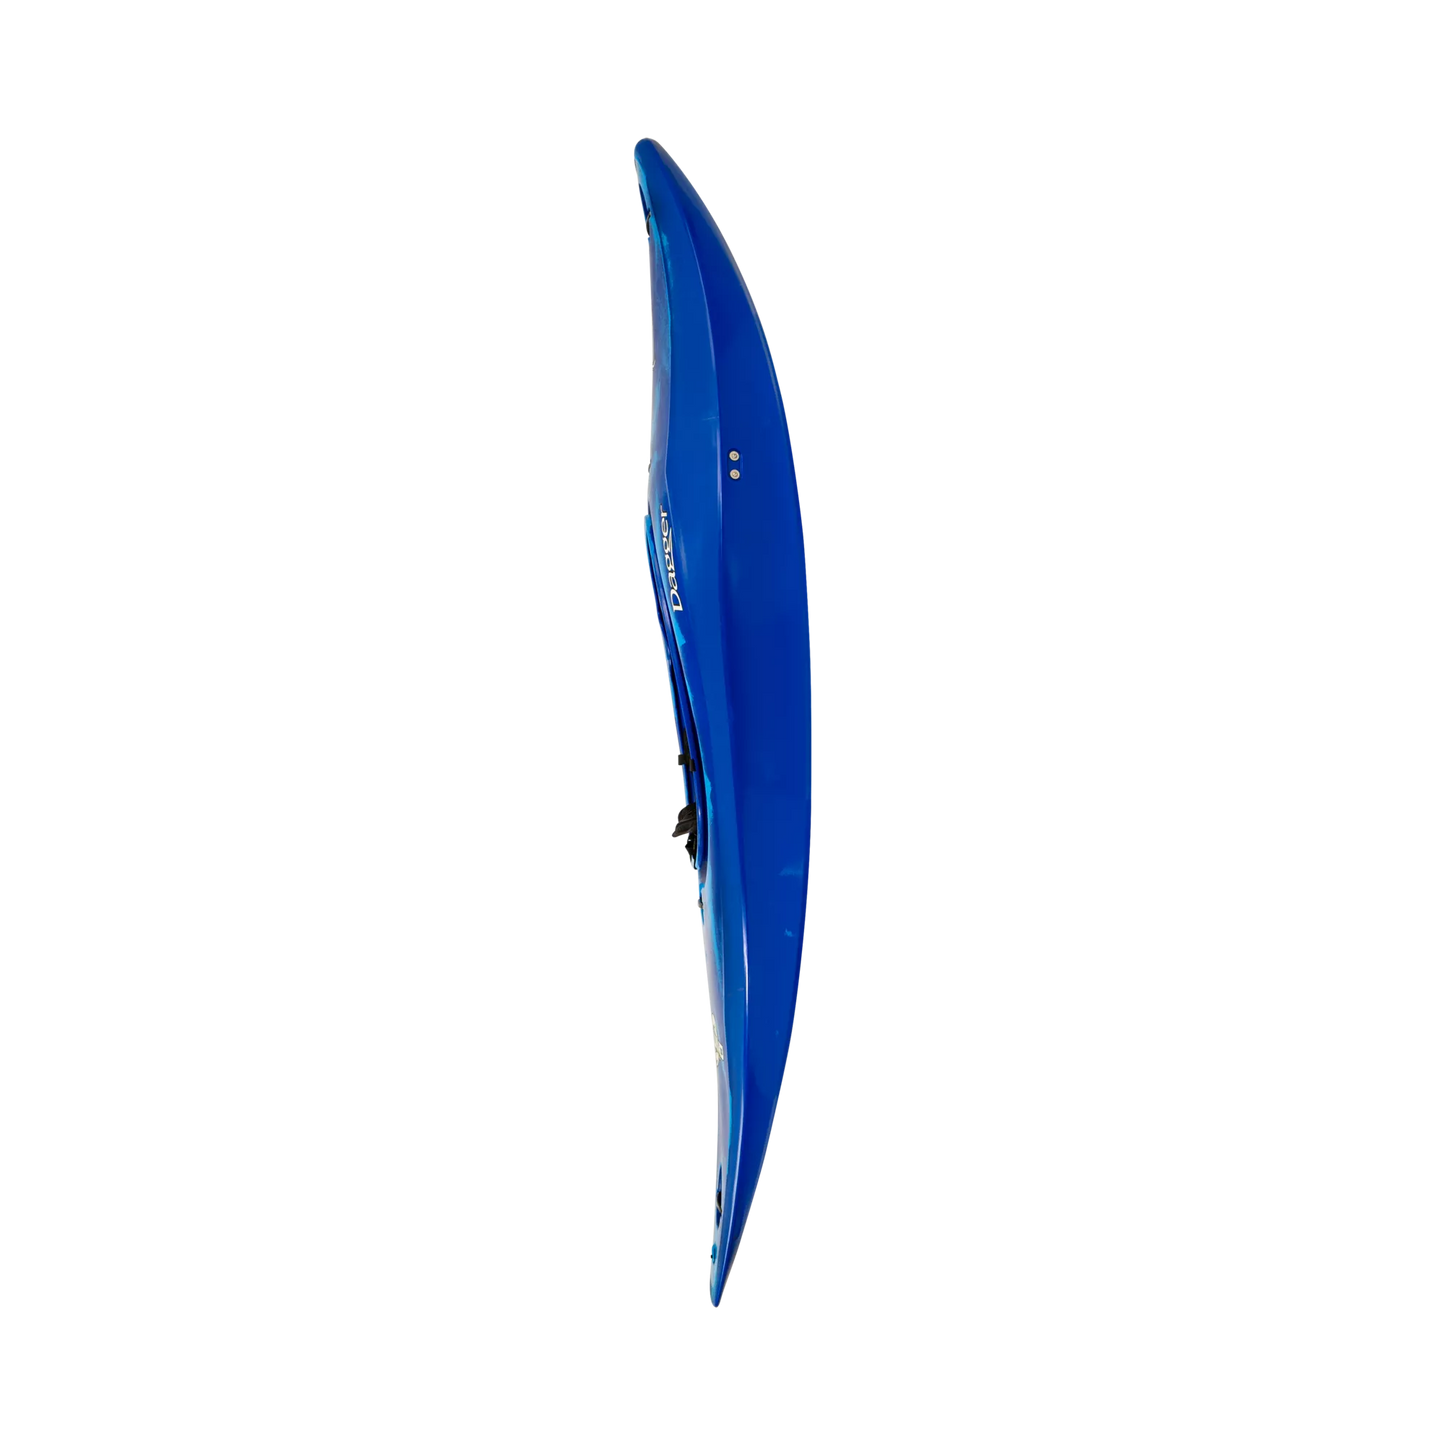 Side view of Blue Smoke Dagger Rewind river play whitewater kayak.